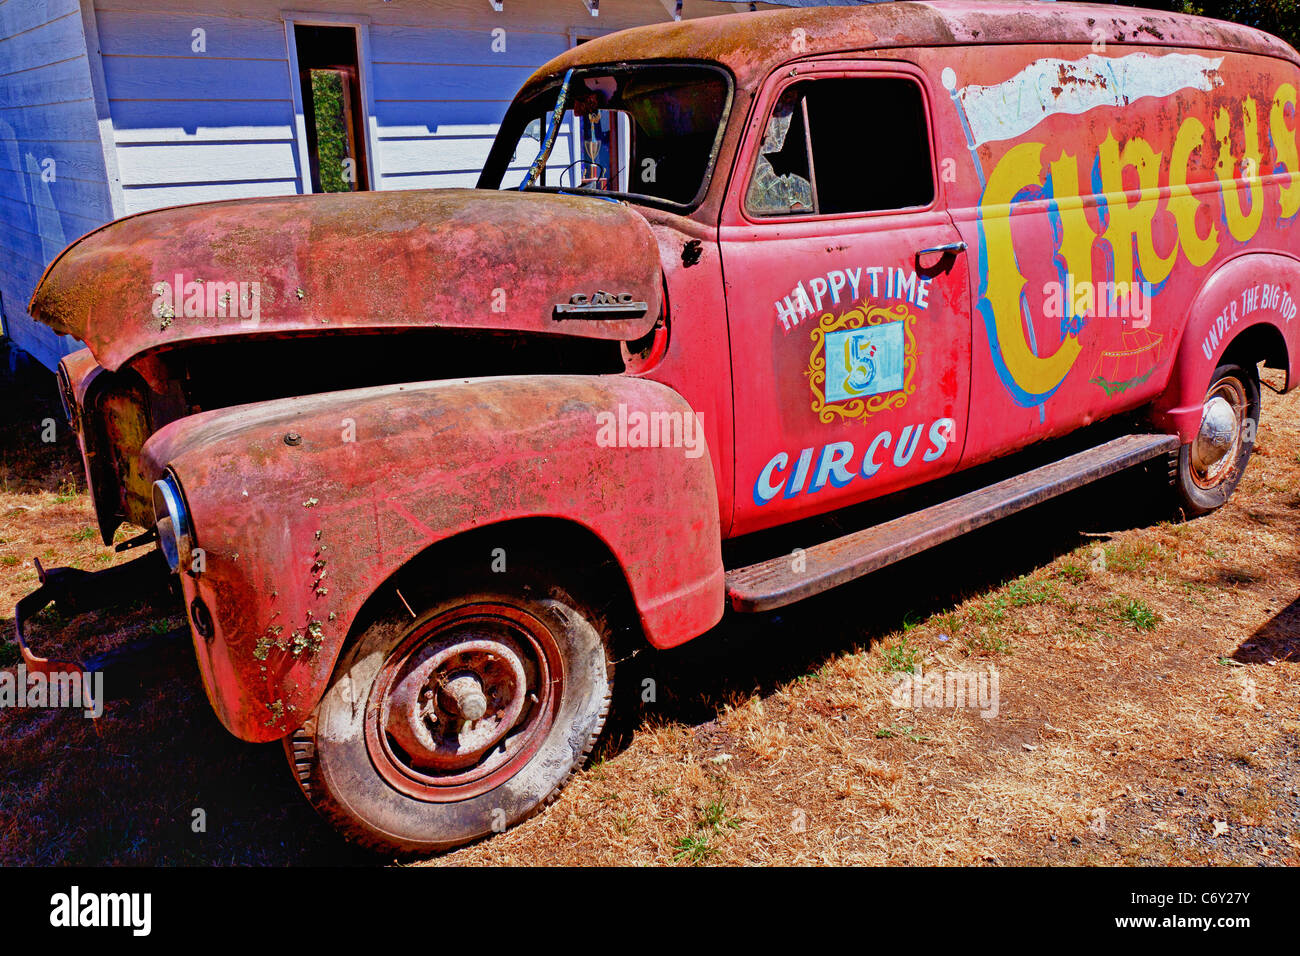 Happy Time Circus Truck, old and in disrepair Stock Photo